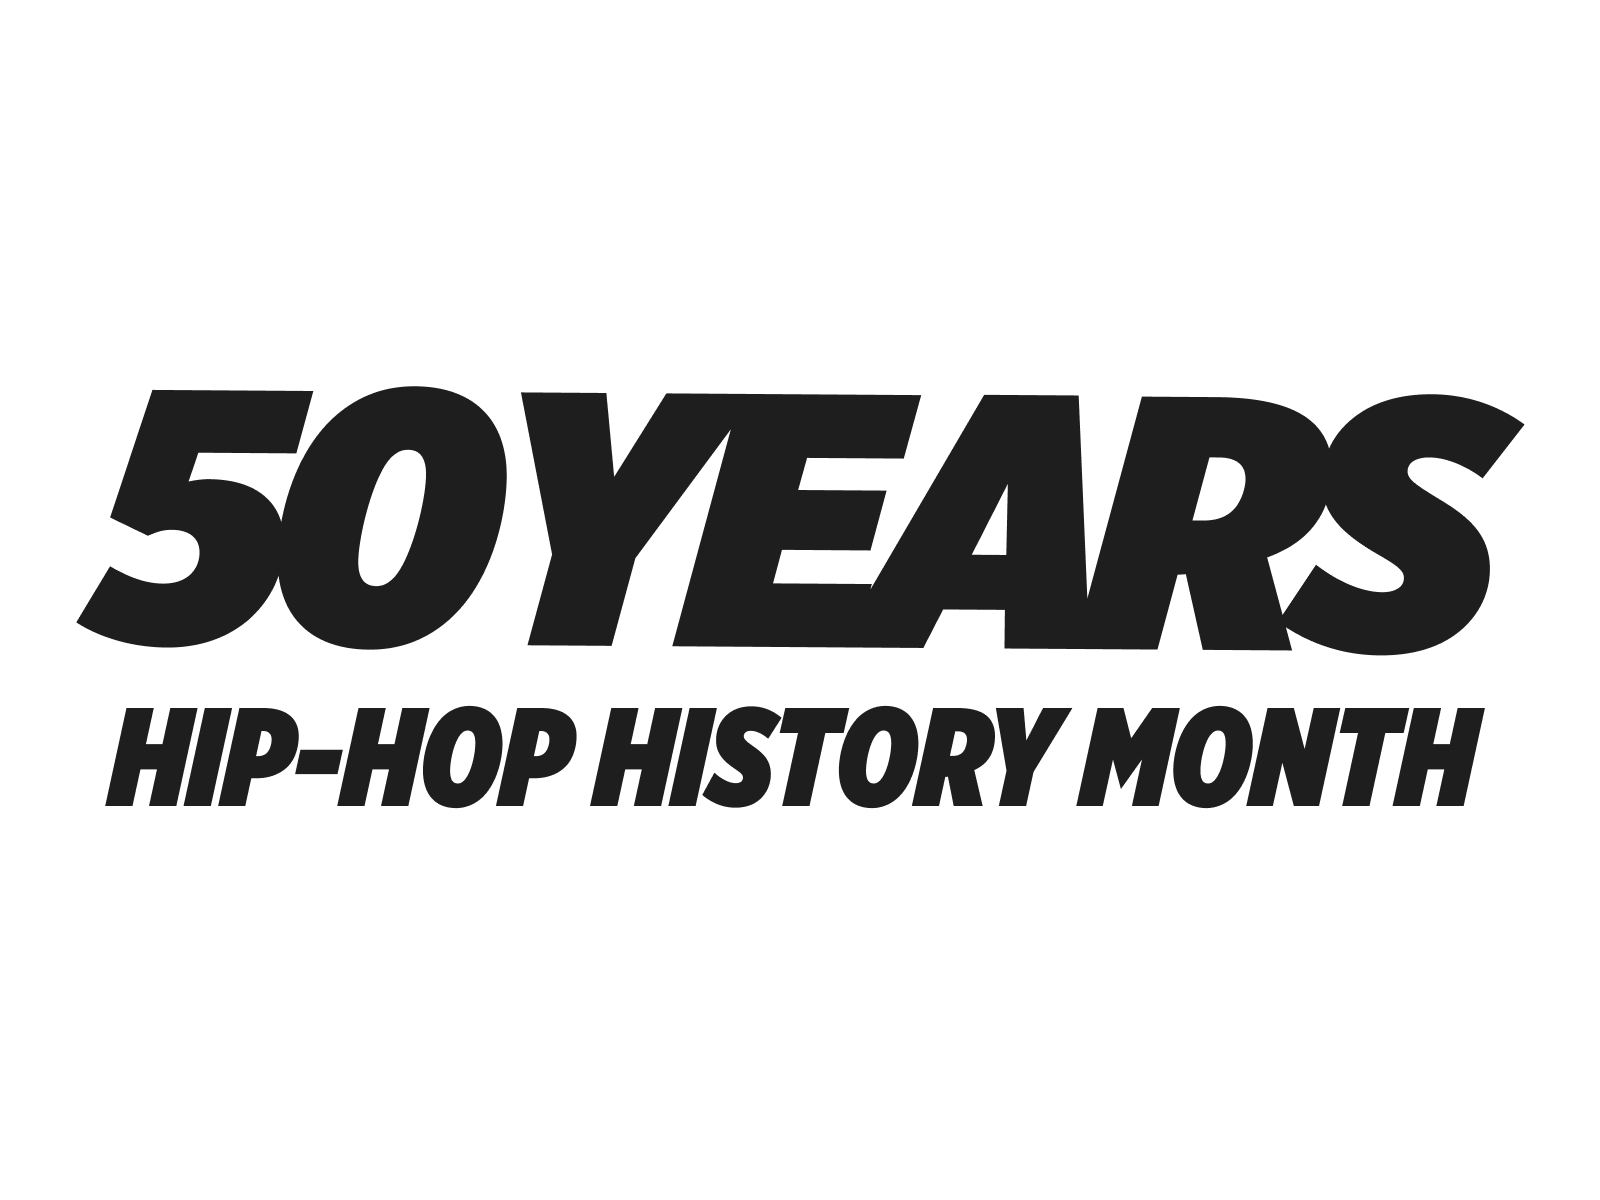 50 Years Hip-Hop History Month